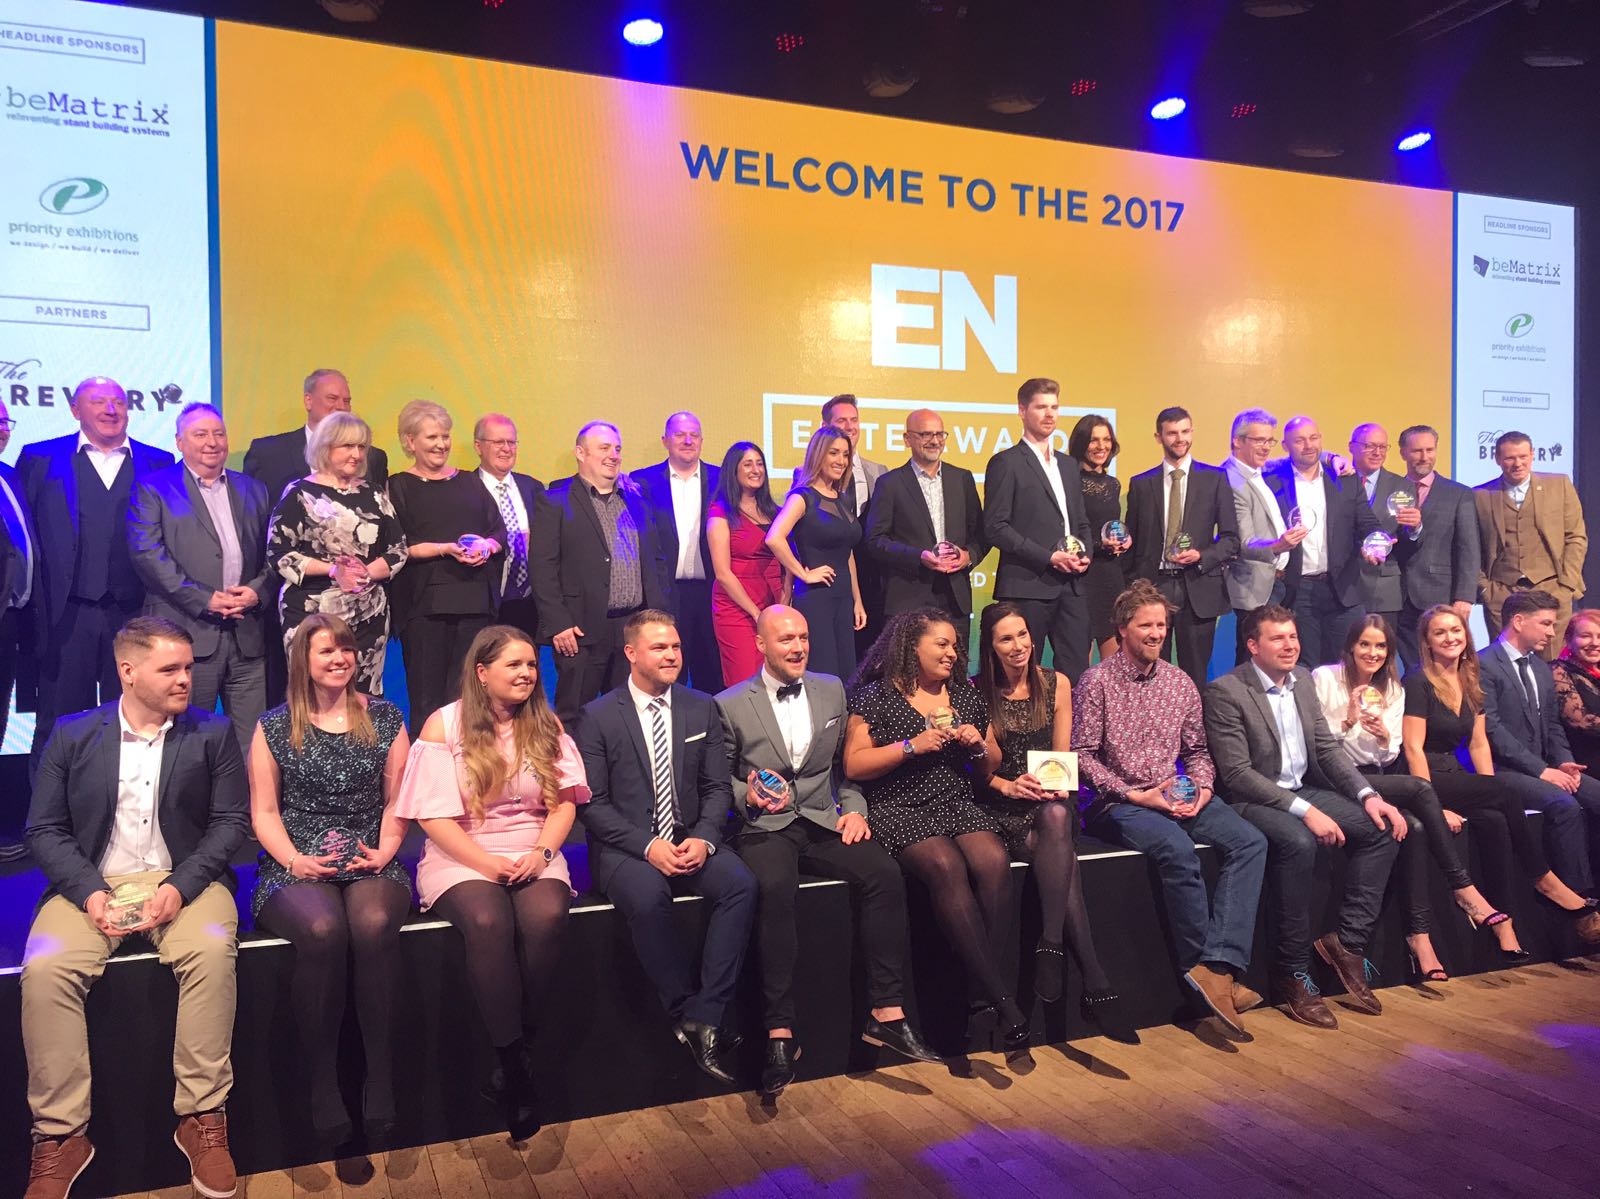 Expo Stars named Best Staffing Company 2017 at Exhibition News Elite Awards